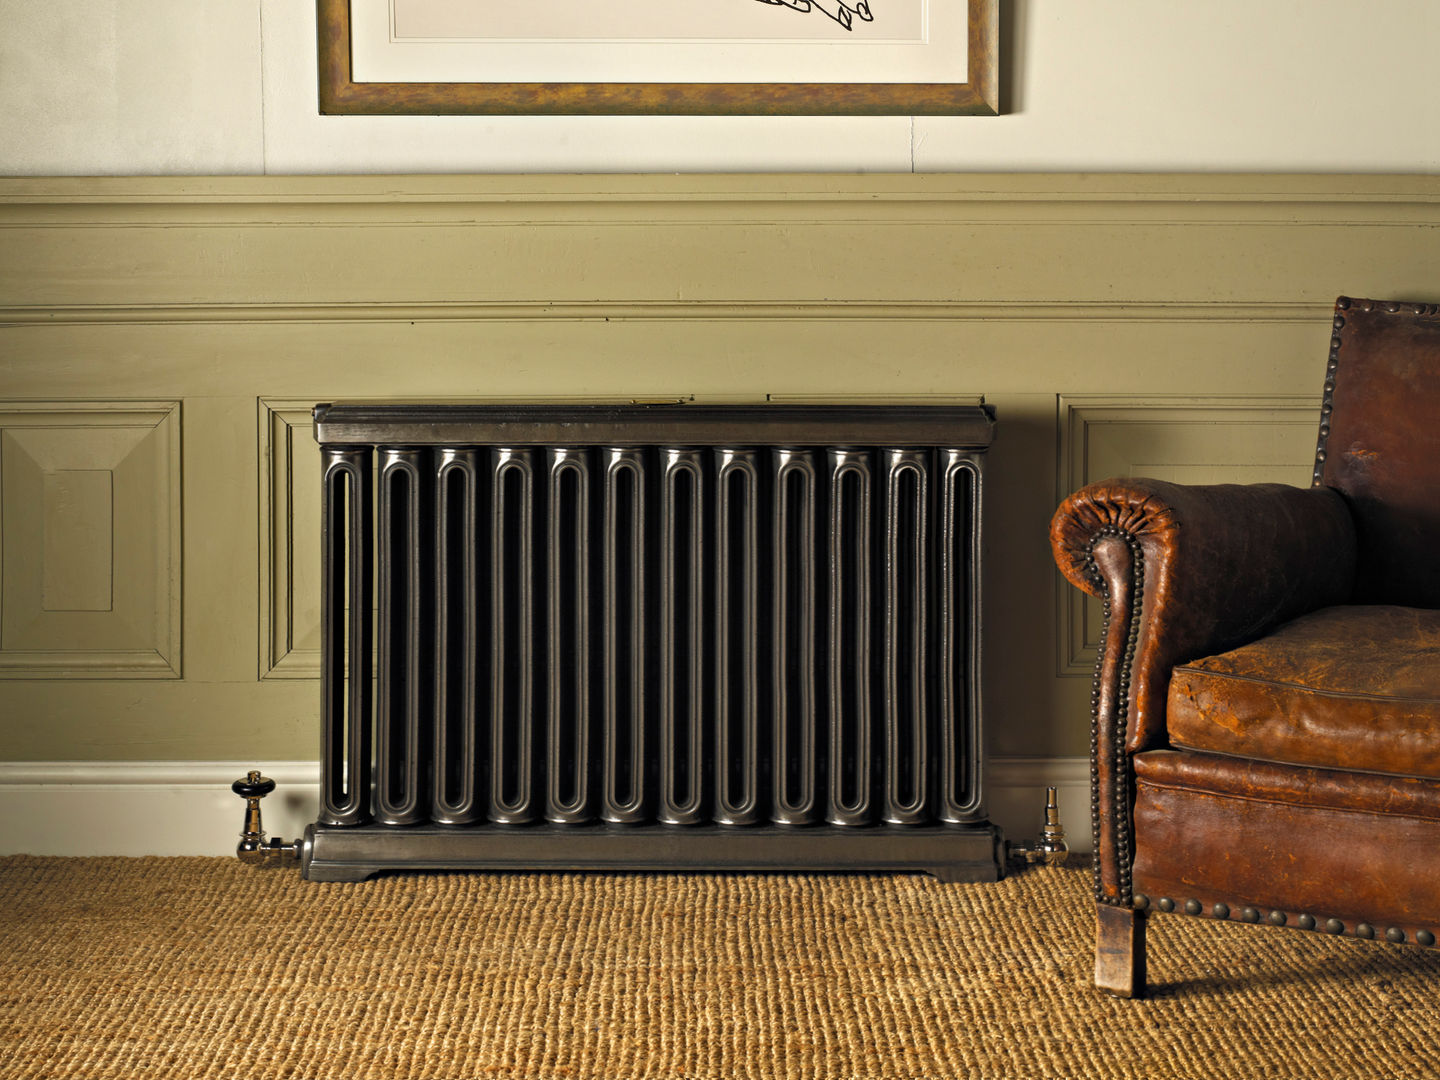 Radiators, Vintage and Architectural Vintage and Architectural Living room Accessories & decoration